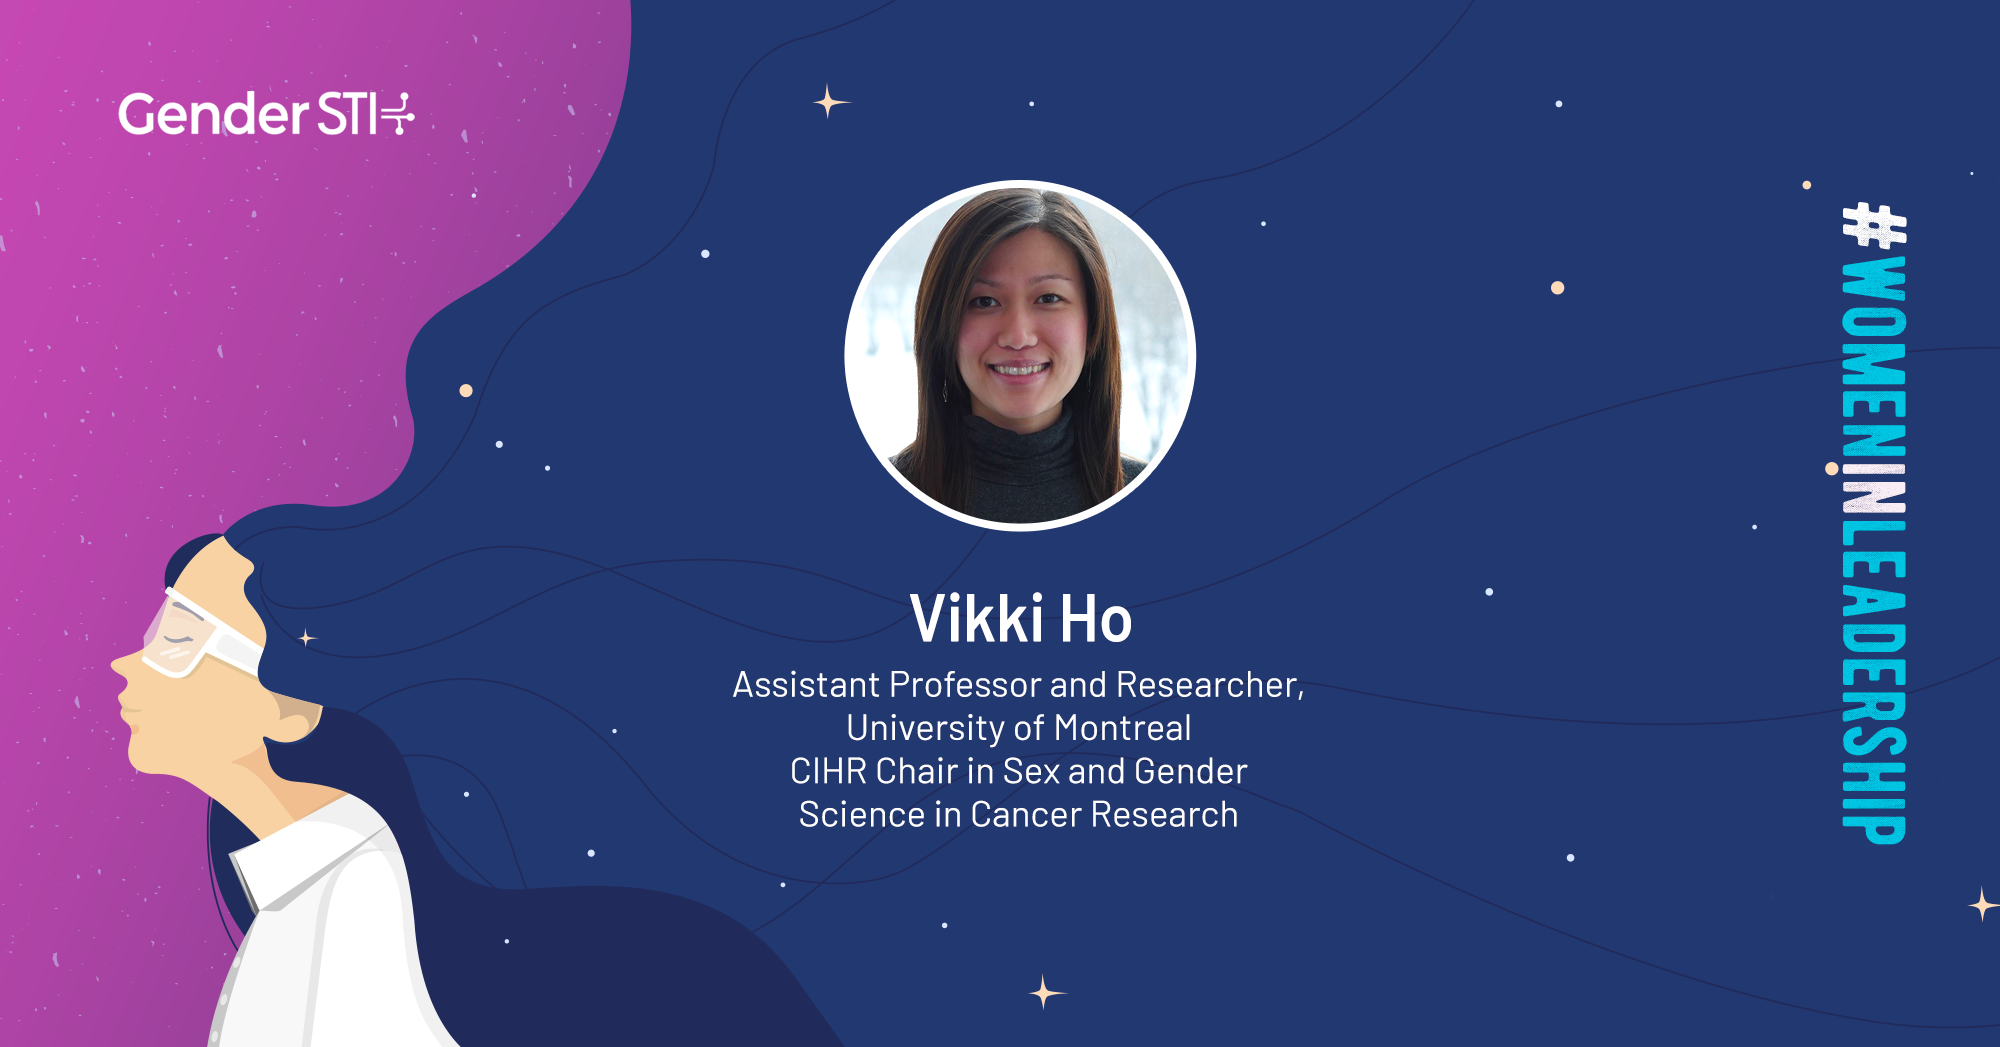 Vikki Ho, Assistant Professor and Researcher at the University of Montreal and the Hospital Research Centre, is one of Gender STI's #WomenInLeadership nominees.